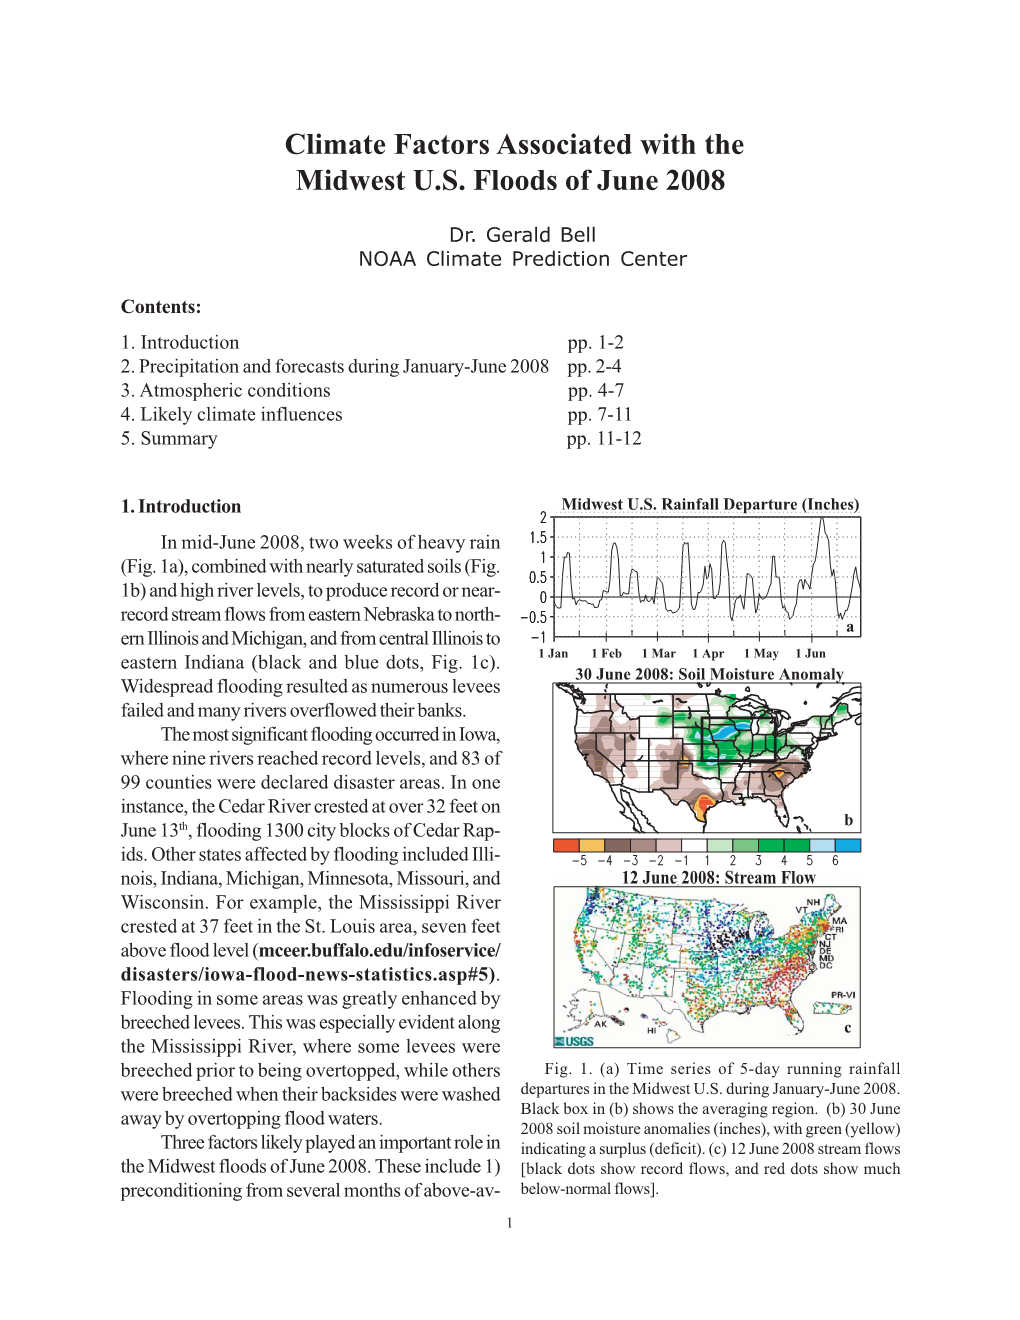 Climate Factors Associated with the Midwest U.S. Floods of June 2008